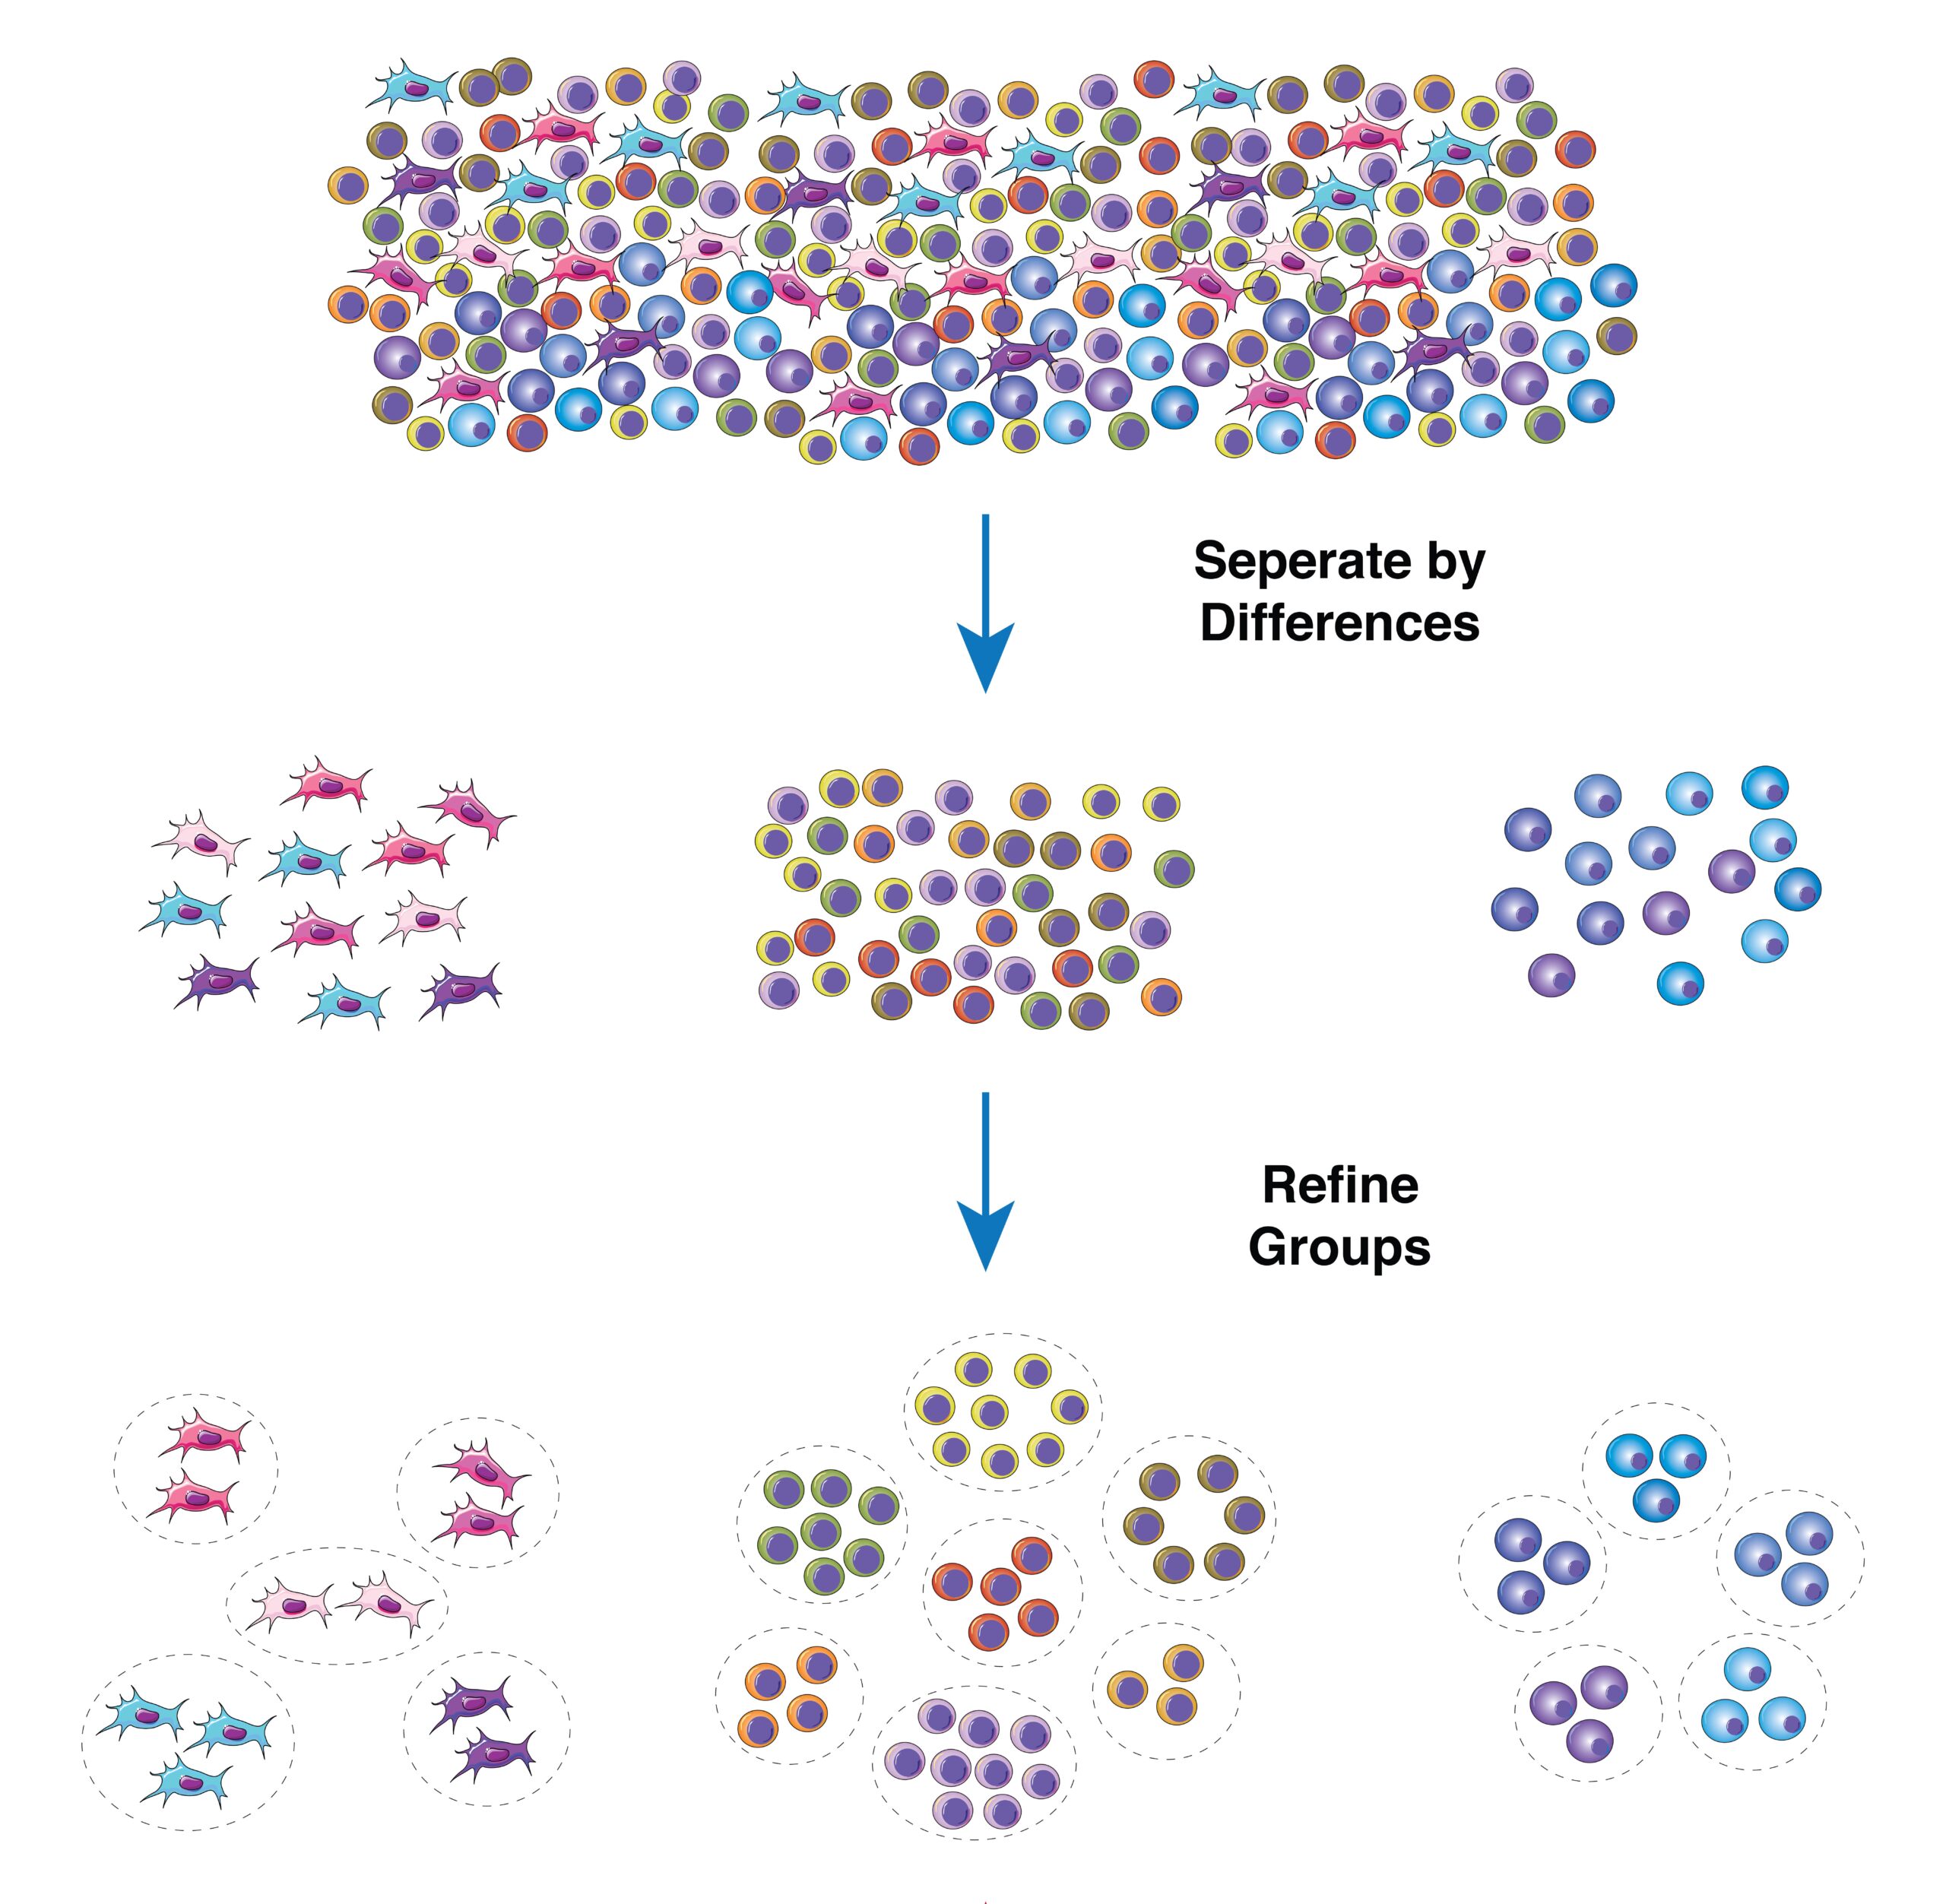 Heterogeneity in immune responses: from populations to single cells